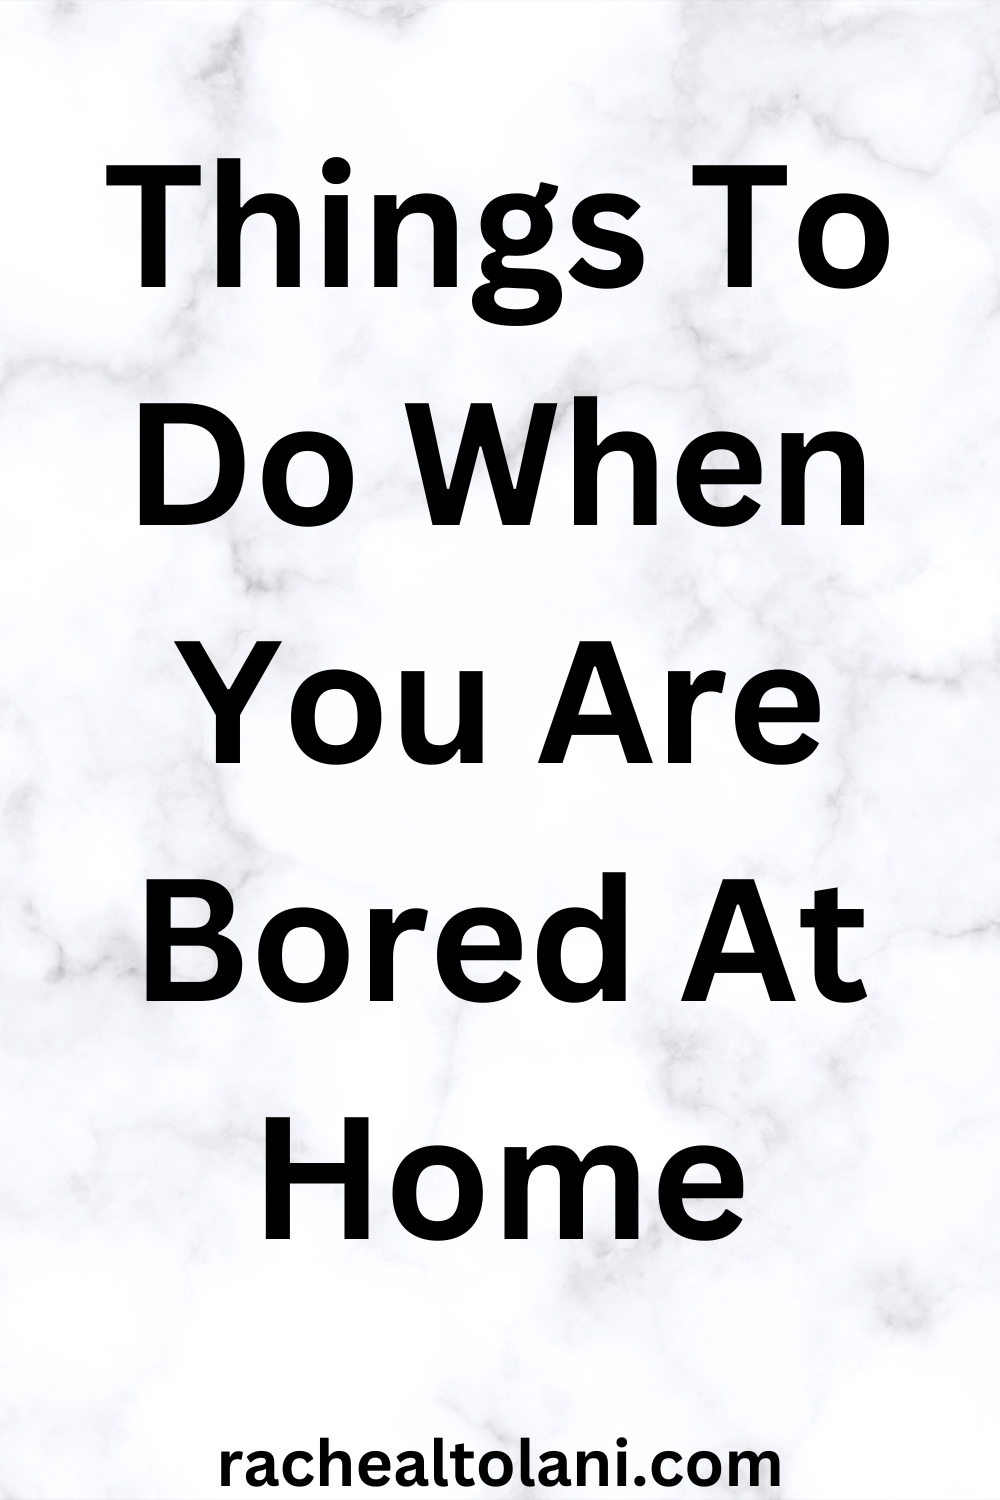 Things to do when you are bored at home